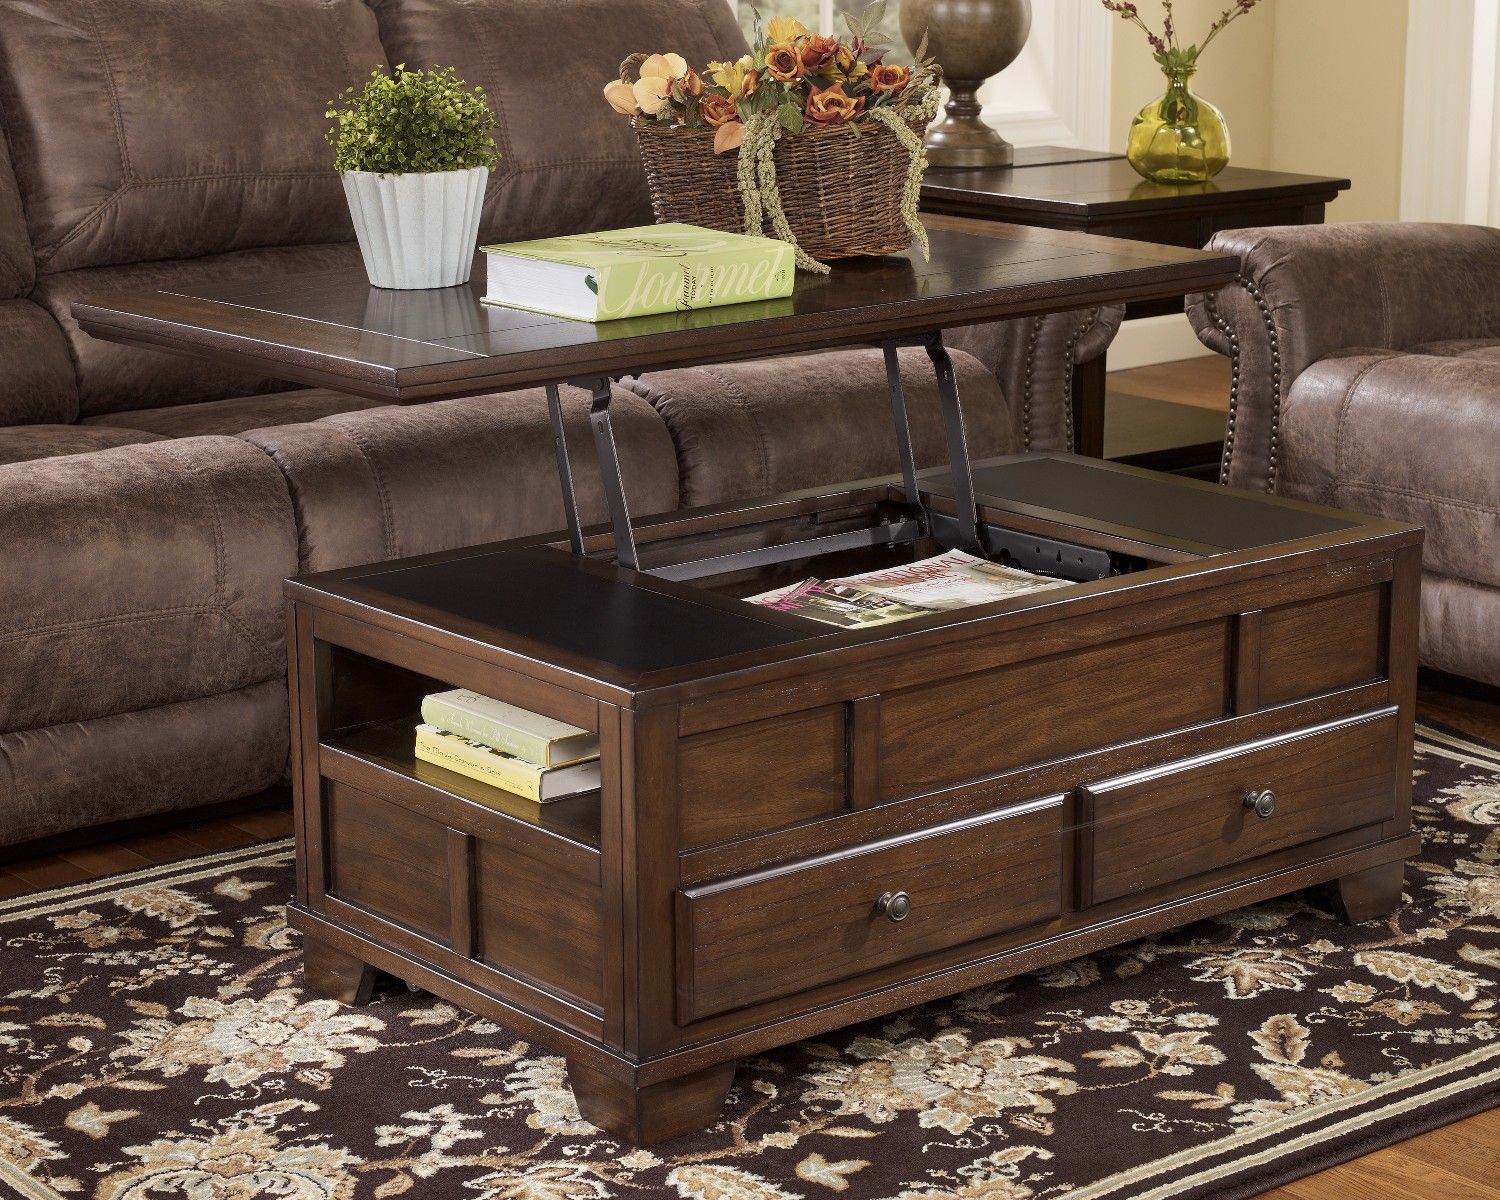 11 Trunk Style Coffee Table Set Pics Intended For Espresso Wood Storage Coffee Tables (View 5 of 15)